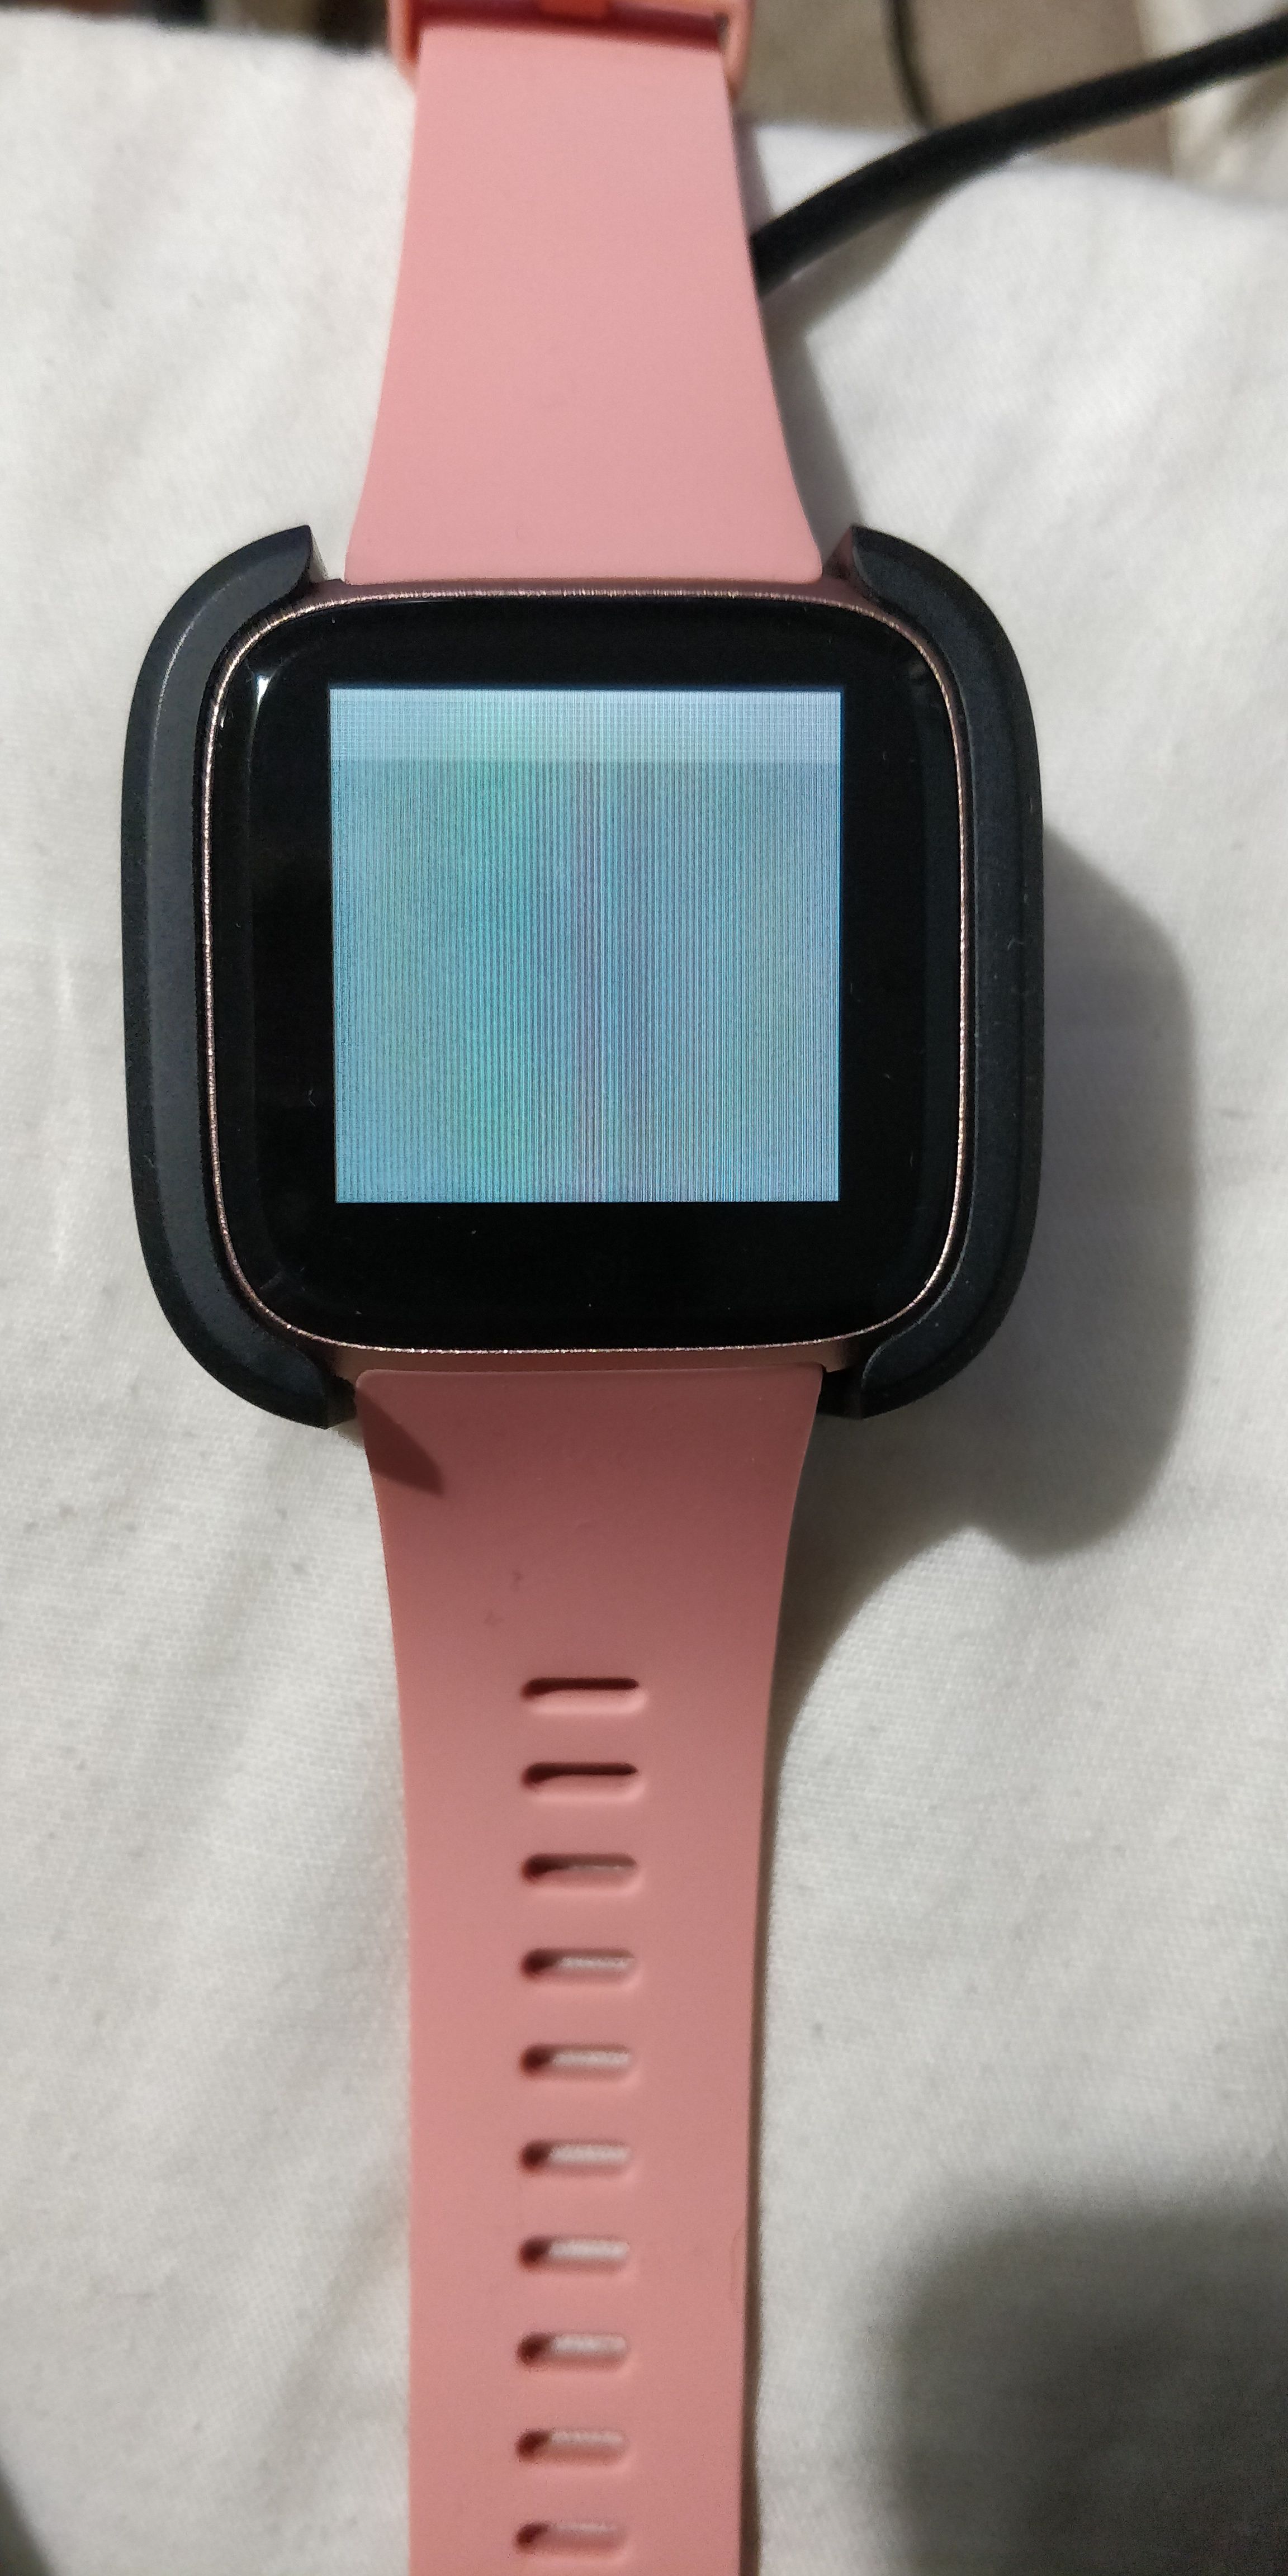 fitbit watch problems